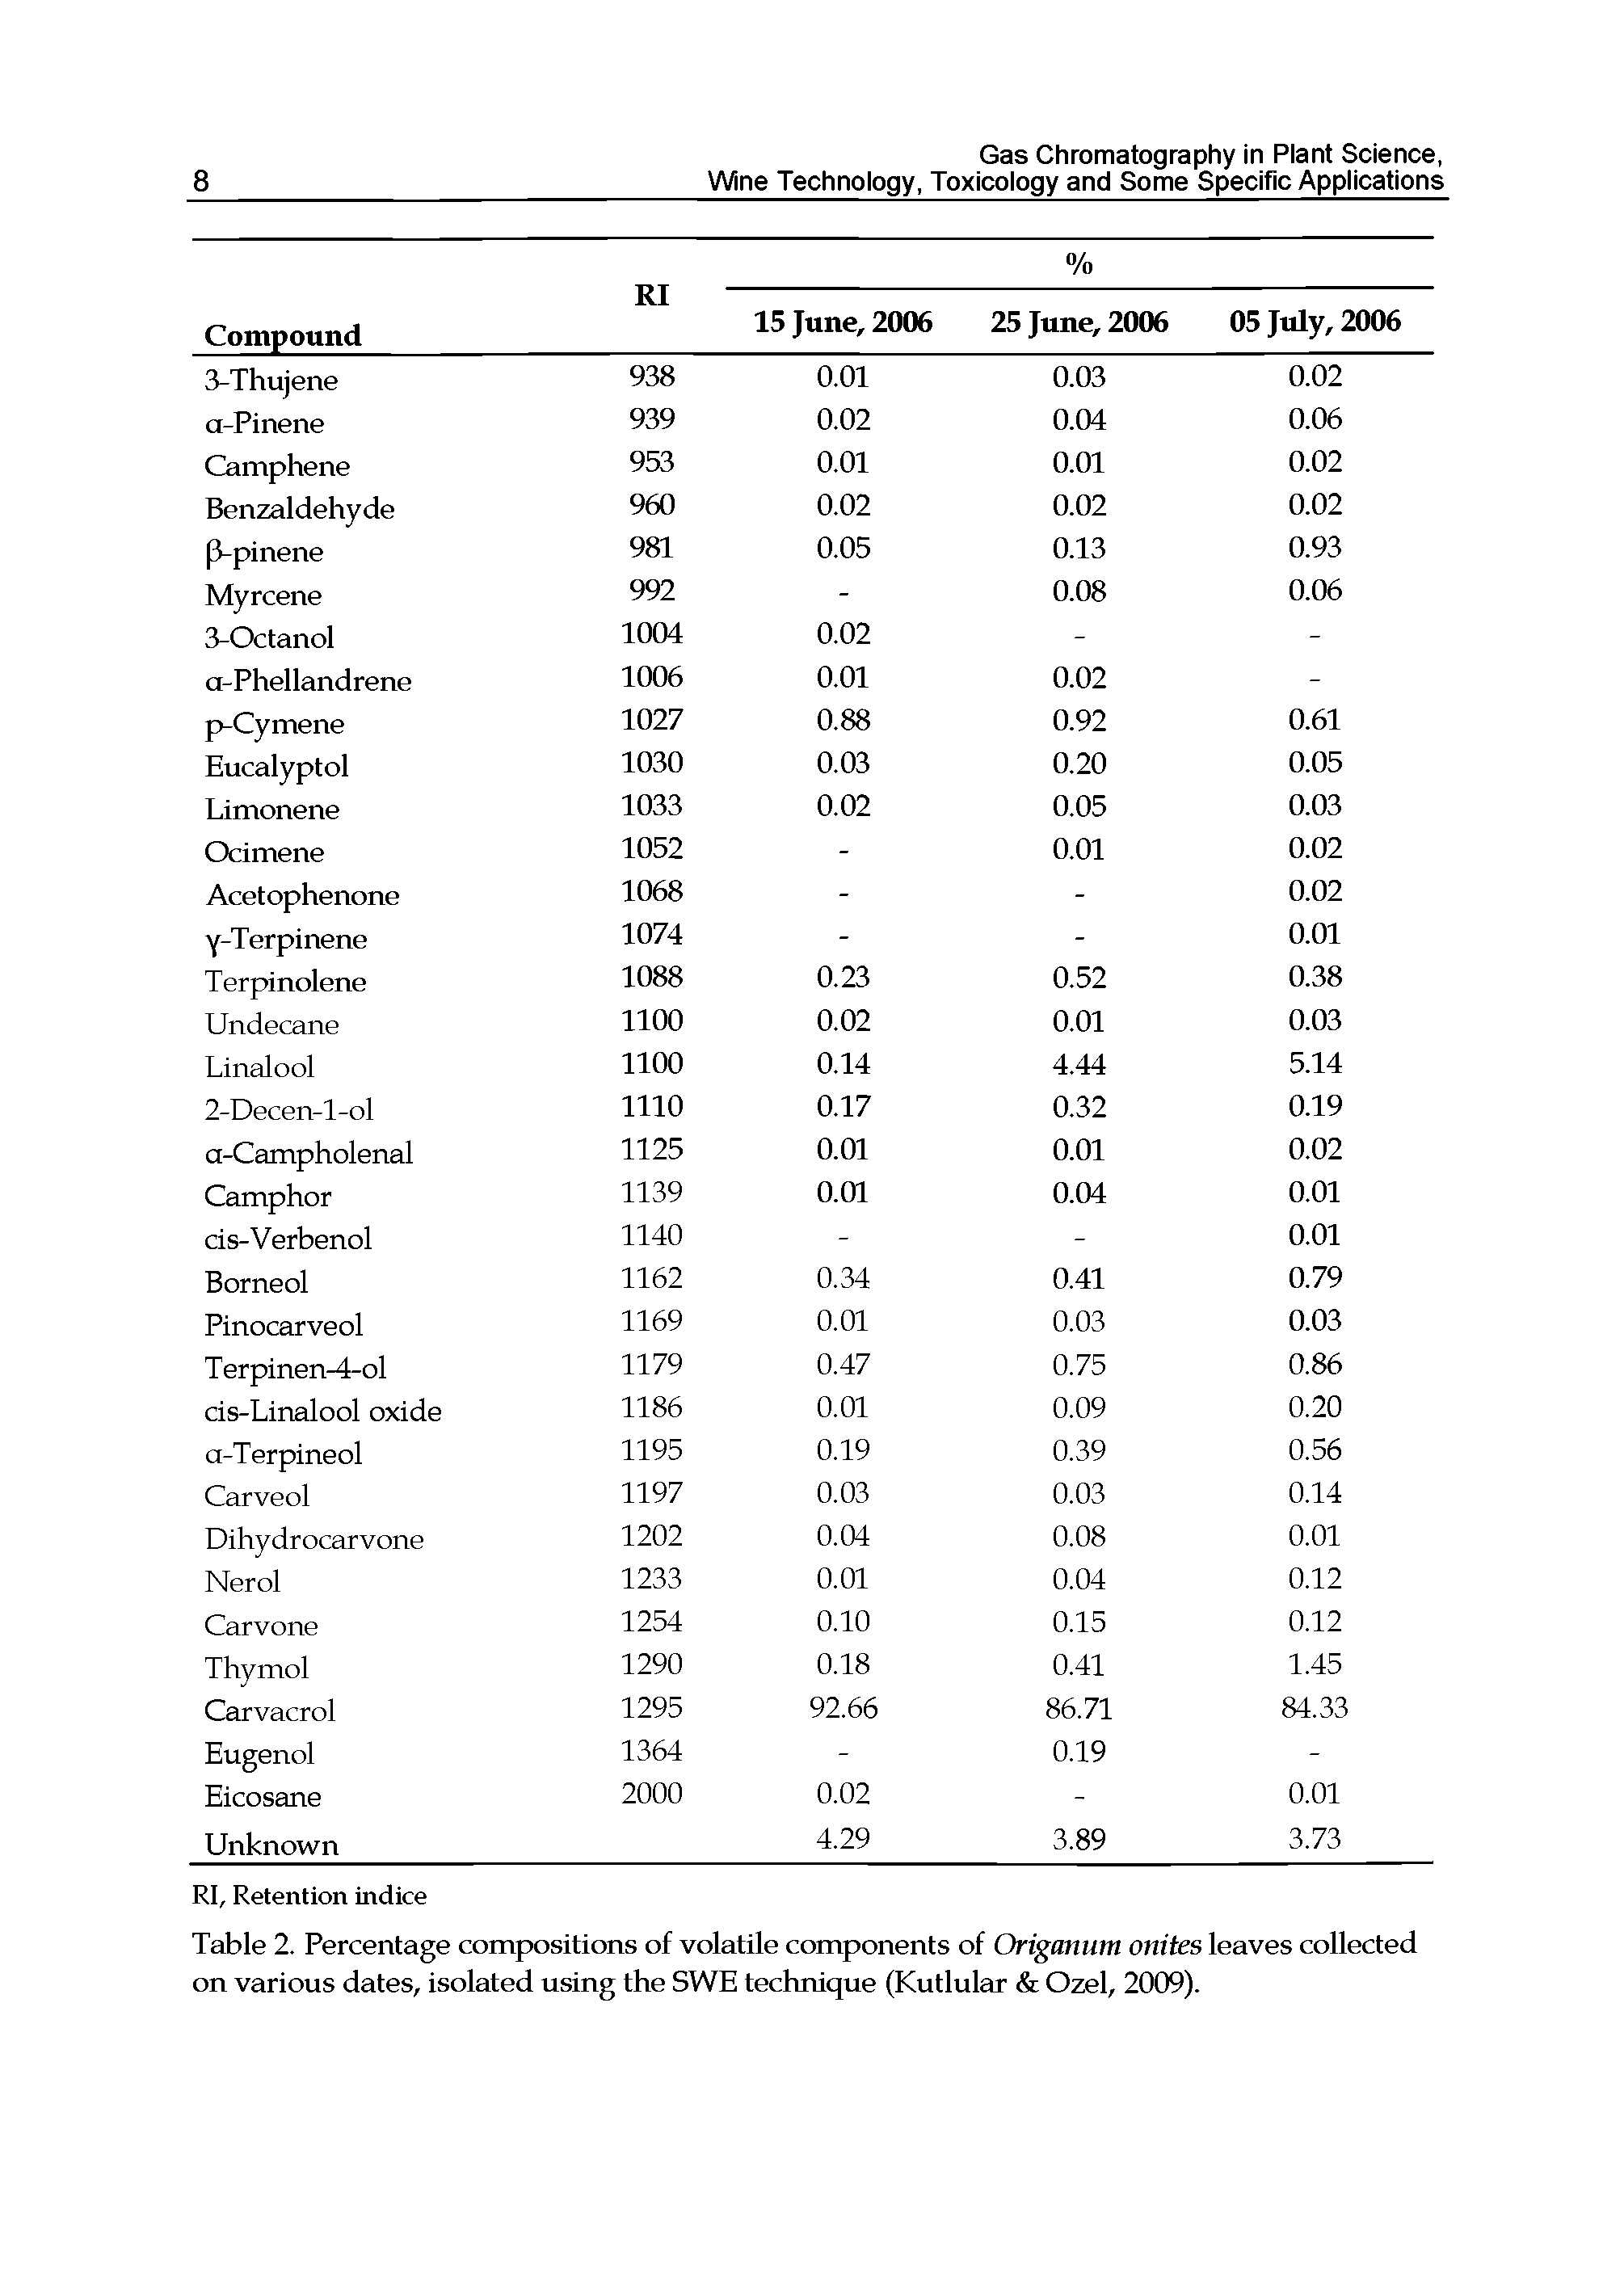 Table 2. Percentage compositions of volatile components of Origanum onites leaves collected on various dates, isolated using the SWE technique (Kutlular Ozel, 2009).